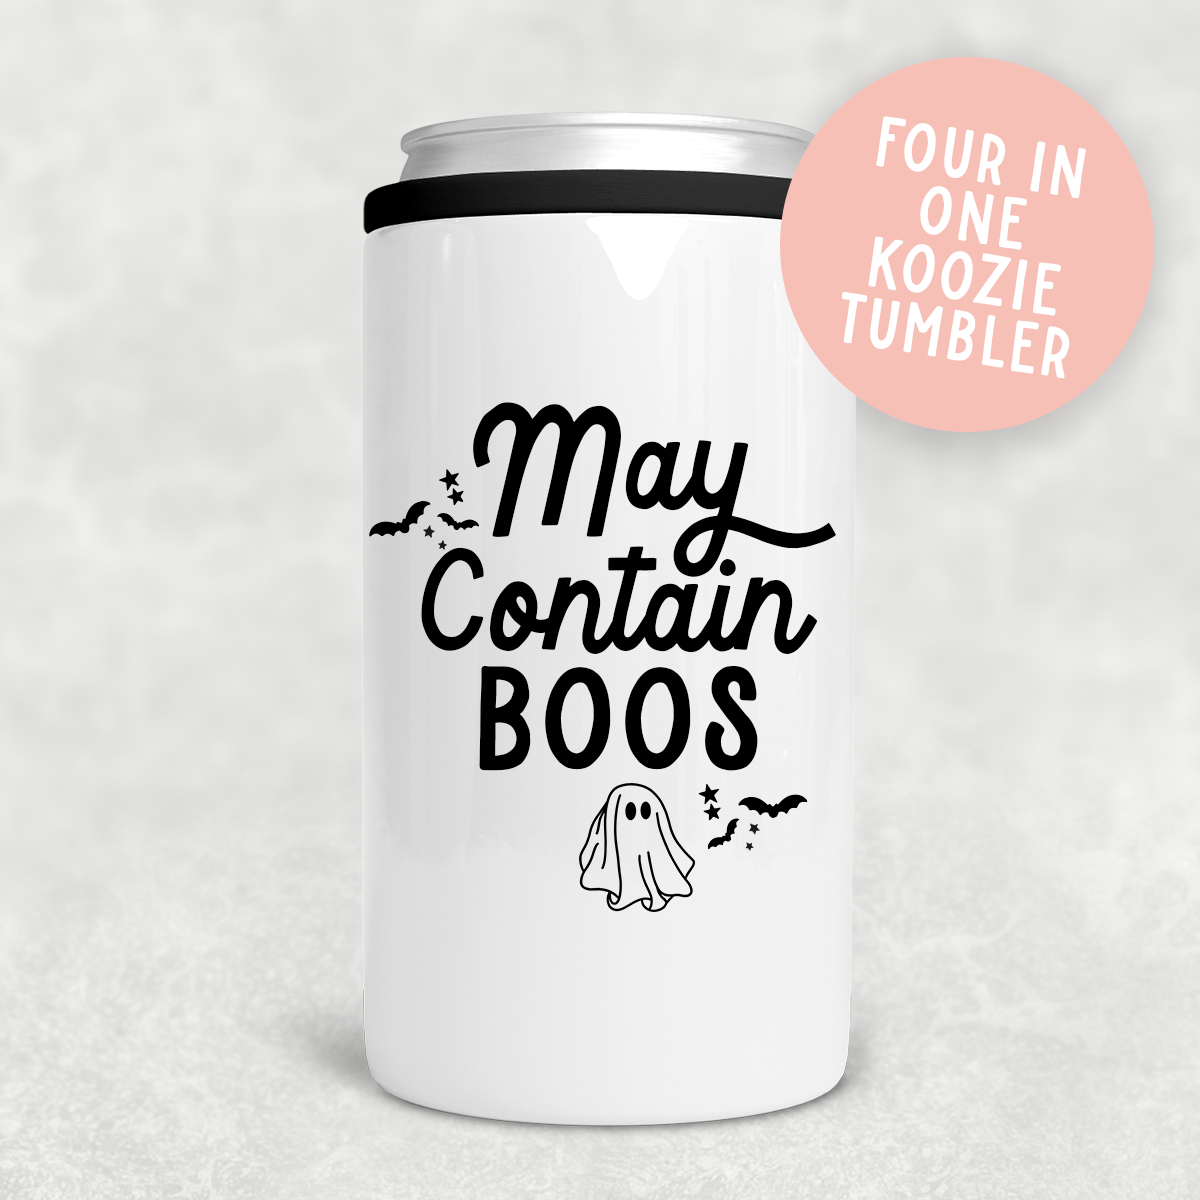 May Contain Boos 4 in 1 Tumbler